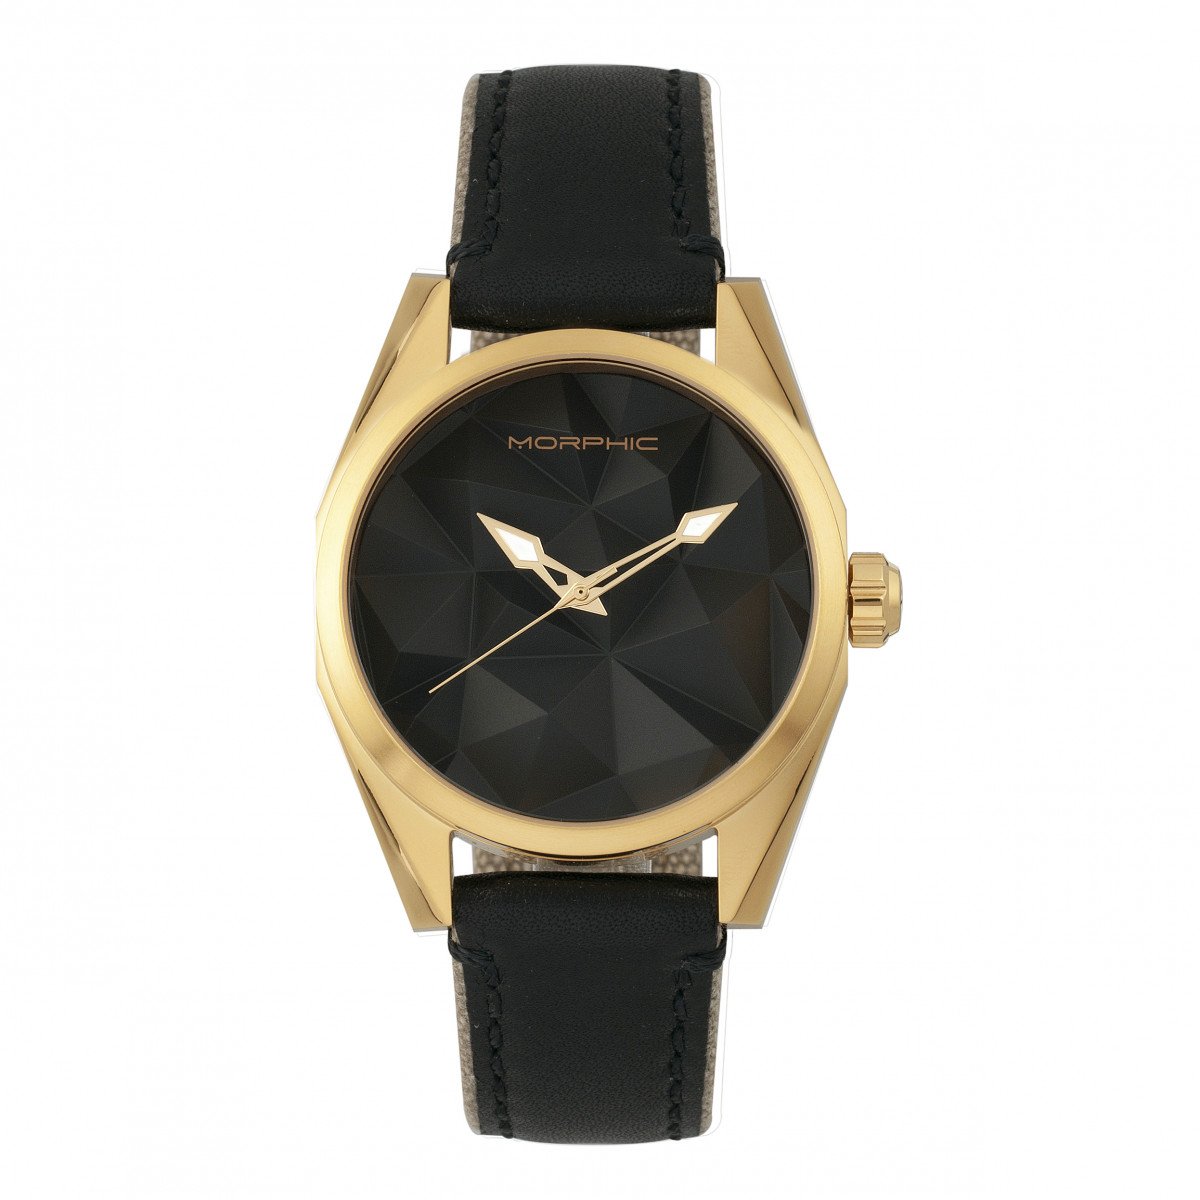 Morphic M59 Series Leather-Overlaid Canvas-Band Watch - Gold/Black - MPH5904